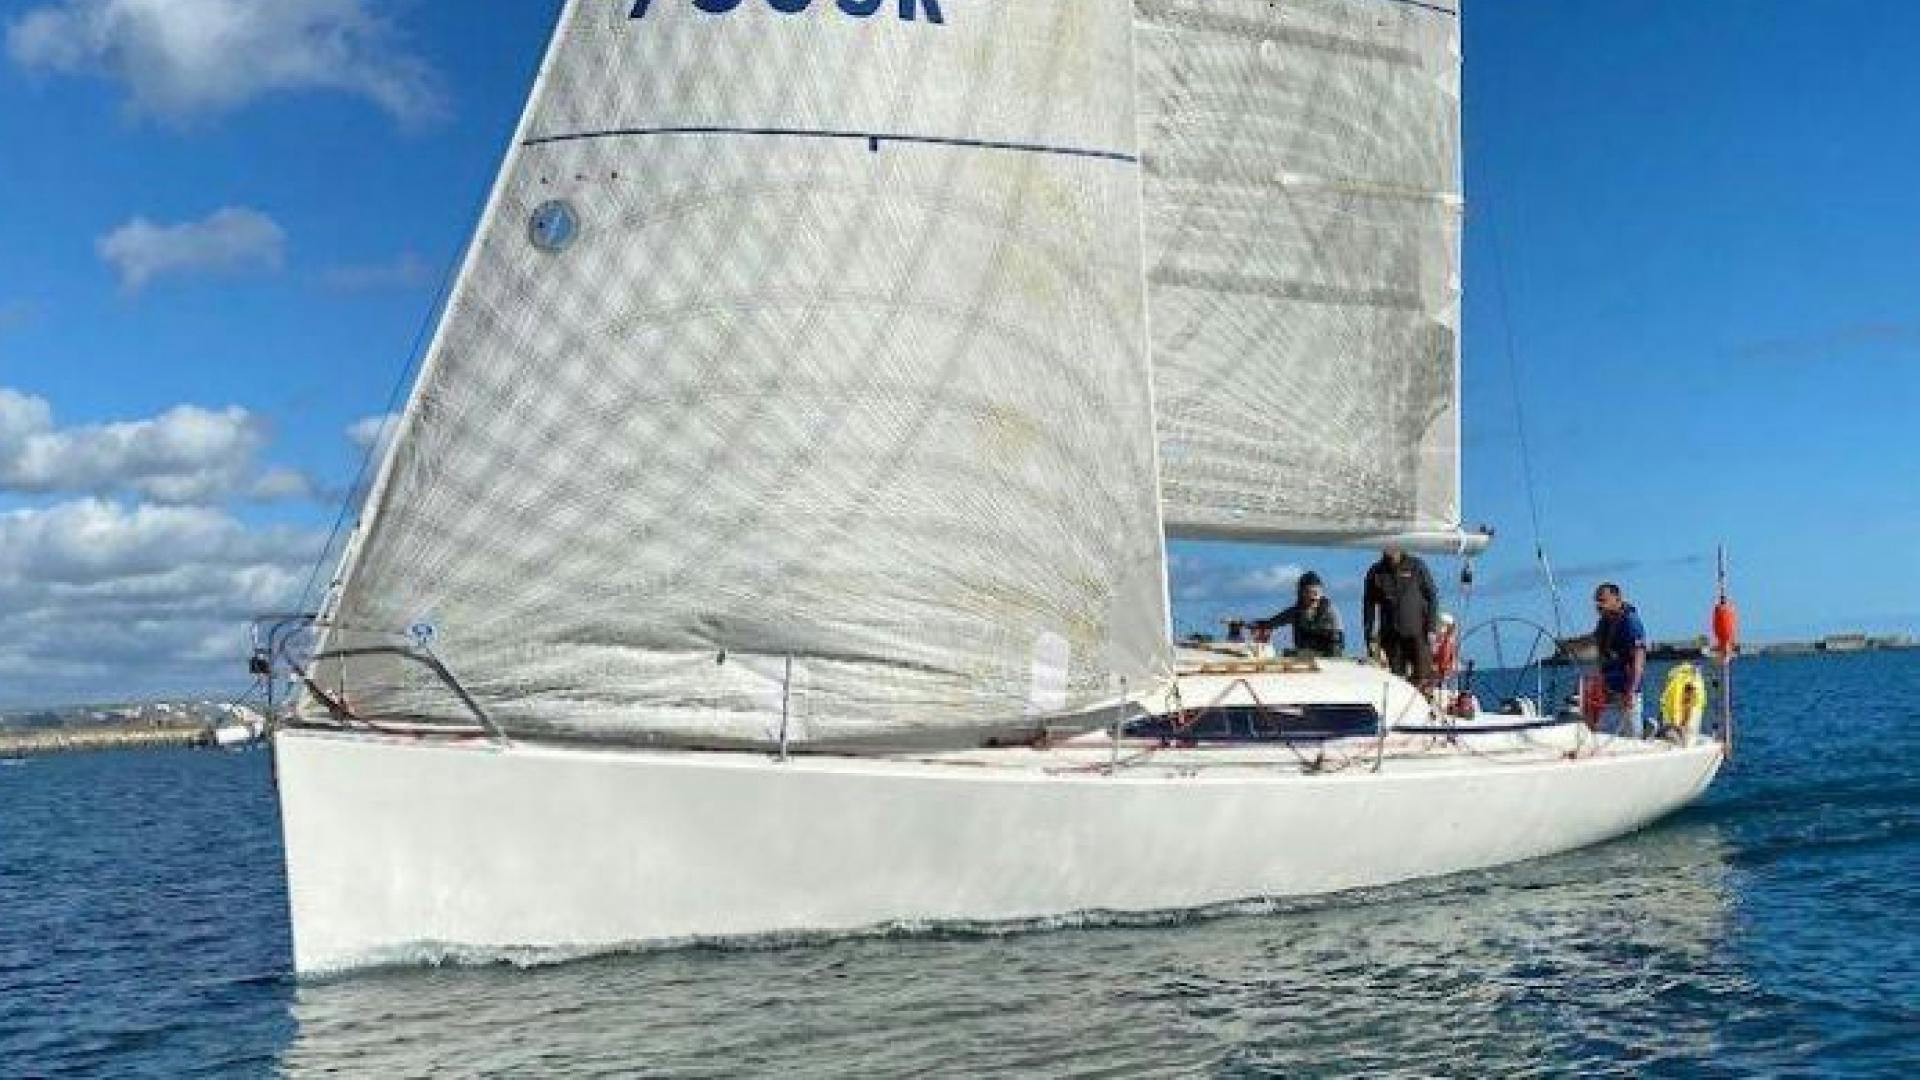 Panther - Offshore racing and sailing charter from Weymouth